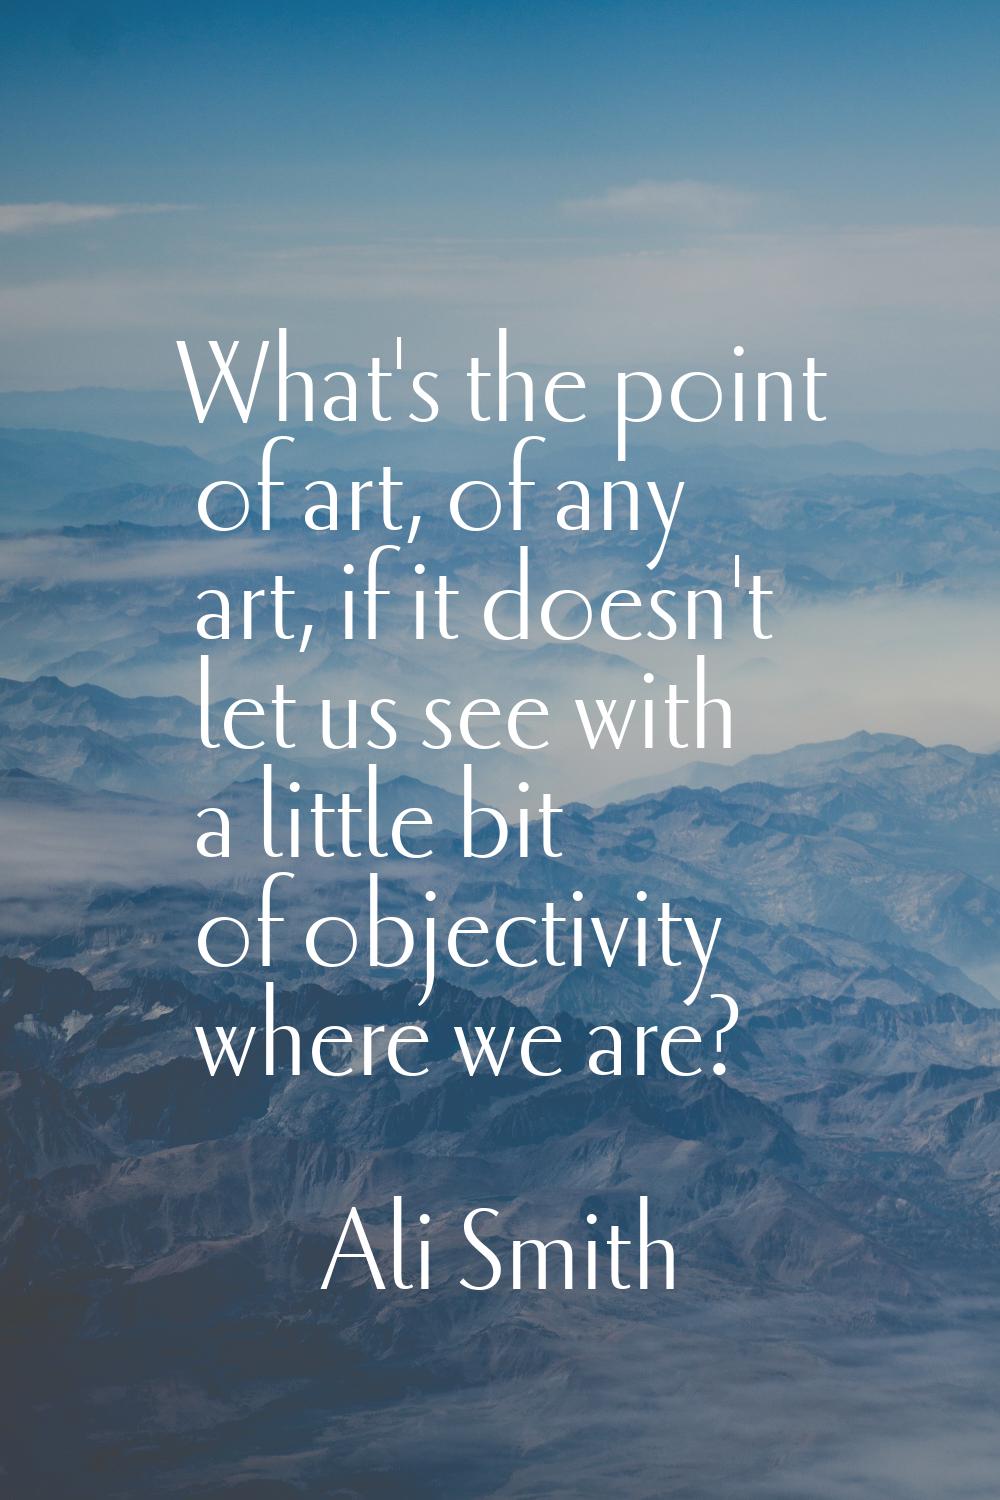 What's the point of art, of any art, if it doesn't let us see with a little bit of objectivity wher